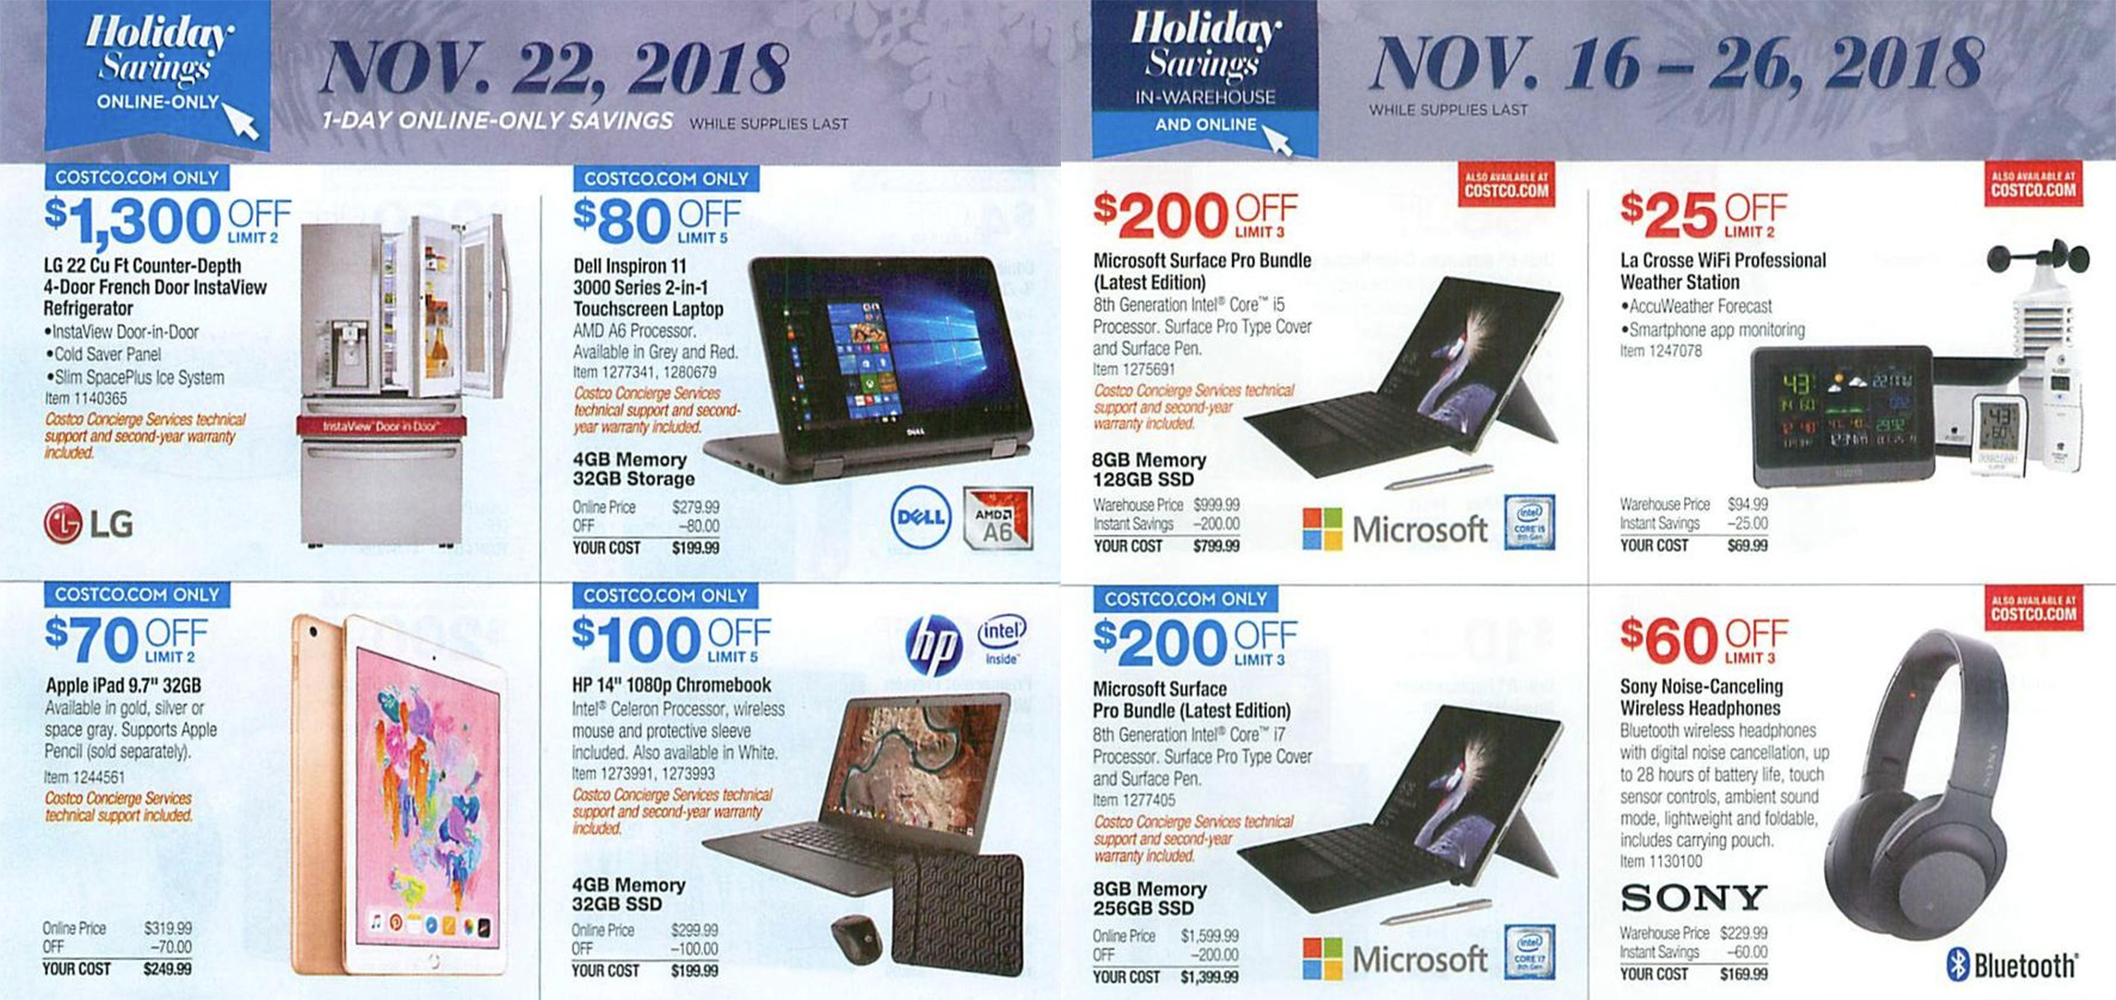 Costco Black Friday ad reveals first 